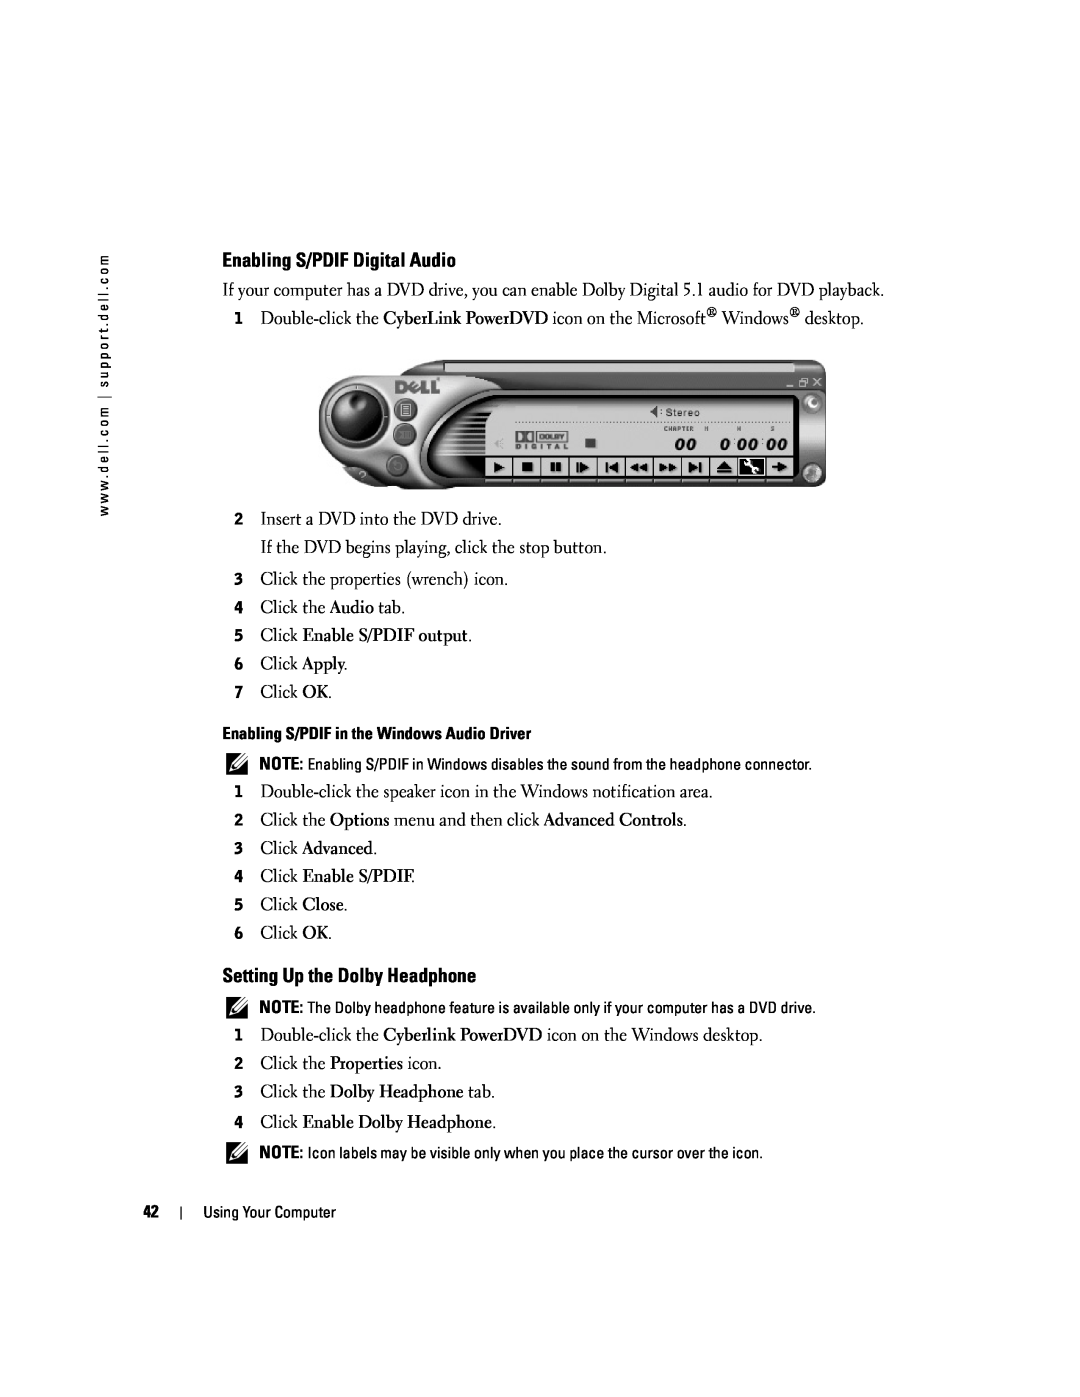 Dell PP09L owner manual Enabling S/PDIF Digital Audio, Setting Up the Dolby Headphone 